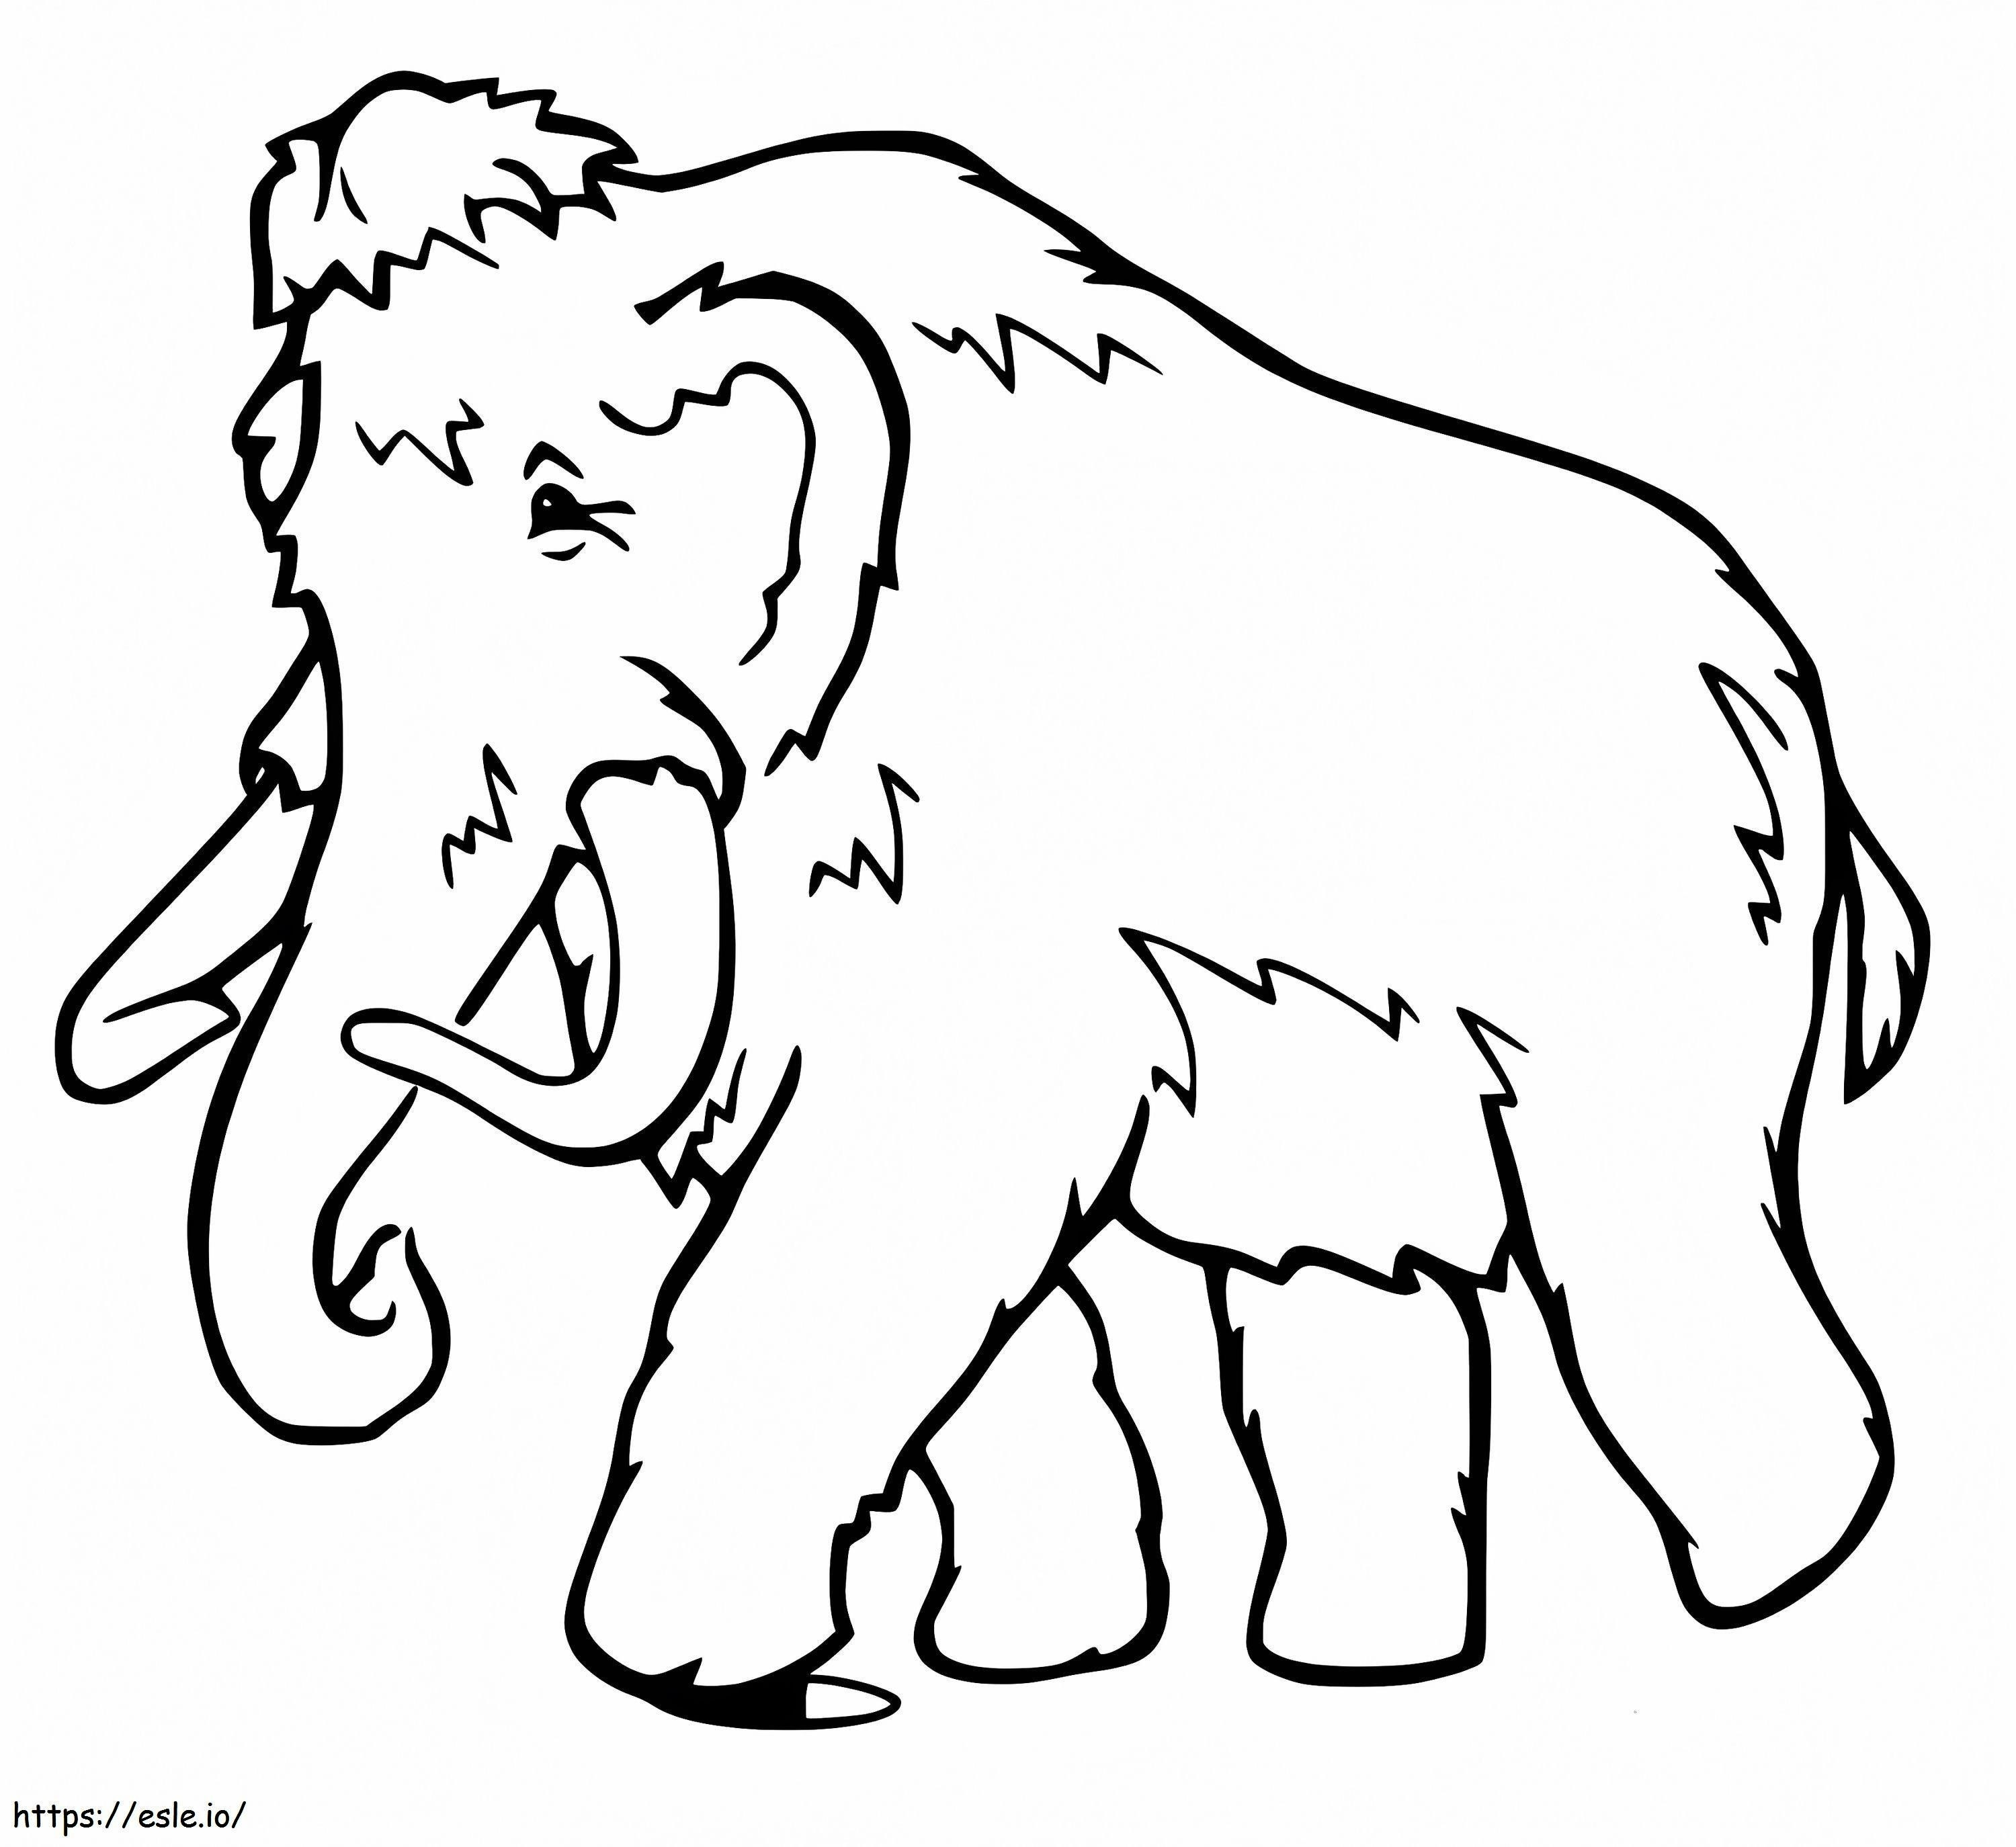 Free Mammoth coloring page